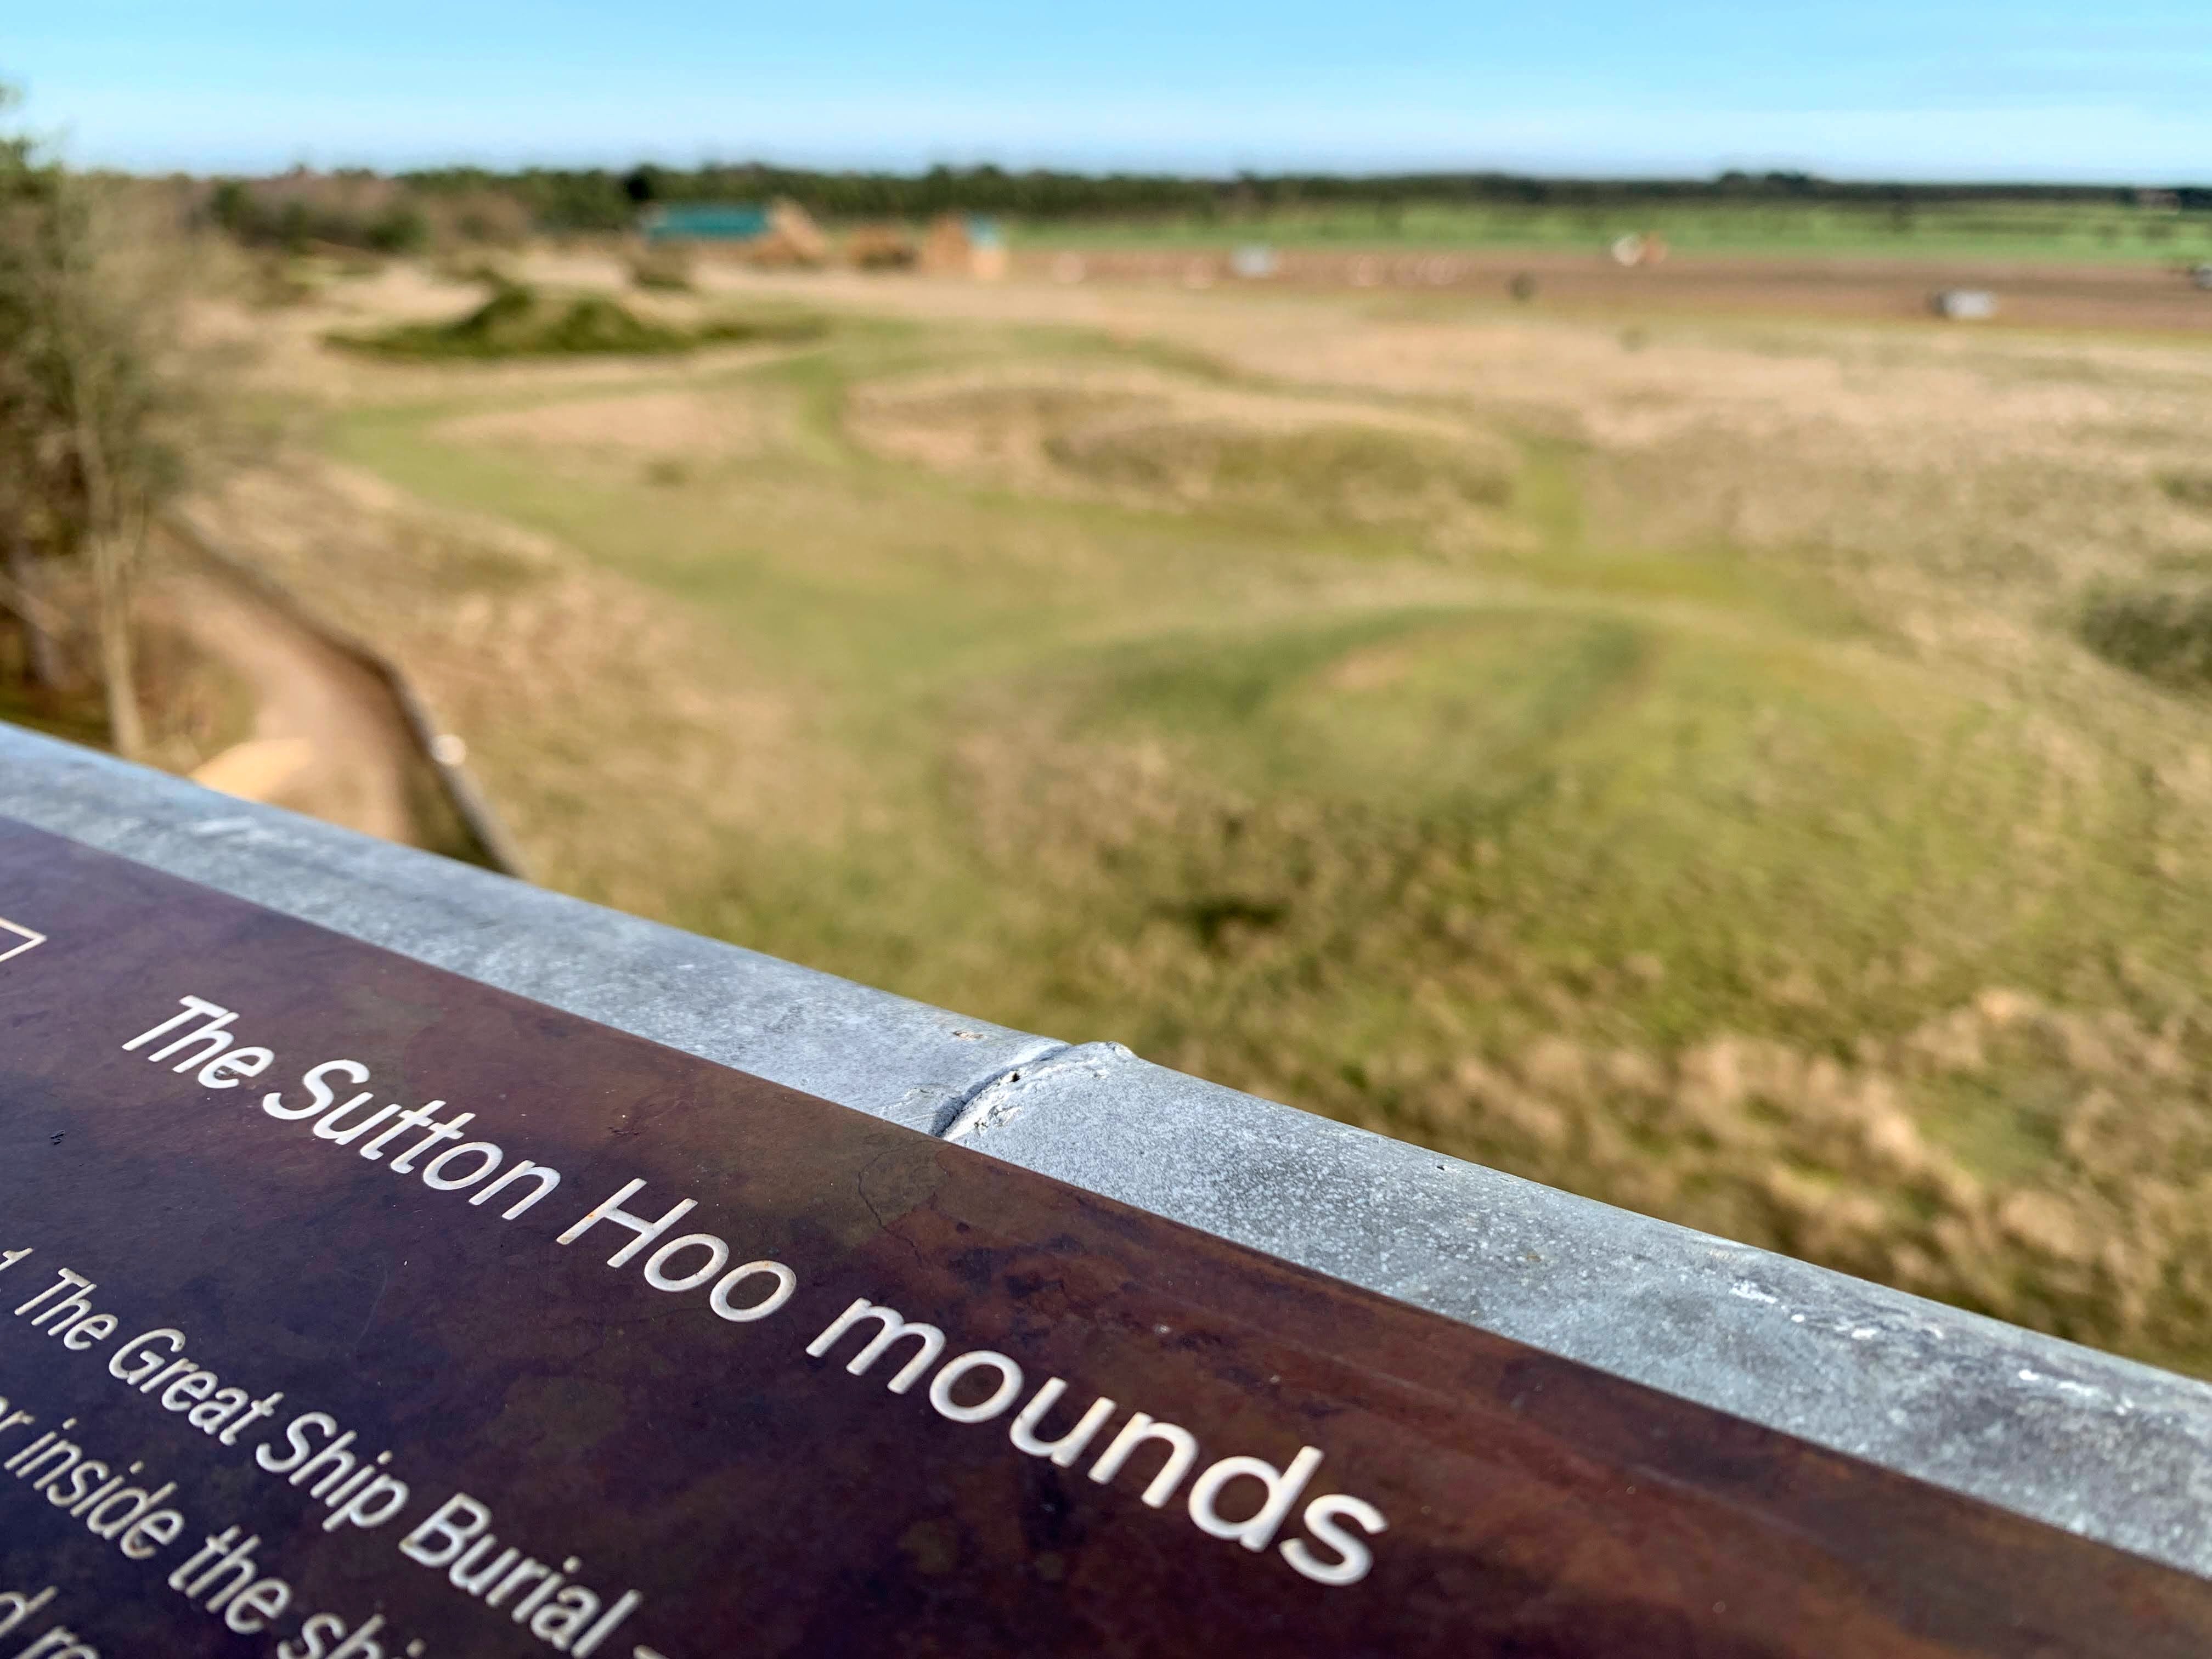 The Sutton Hoo mounds date from the sixth and seventh centuries